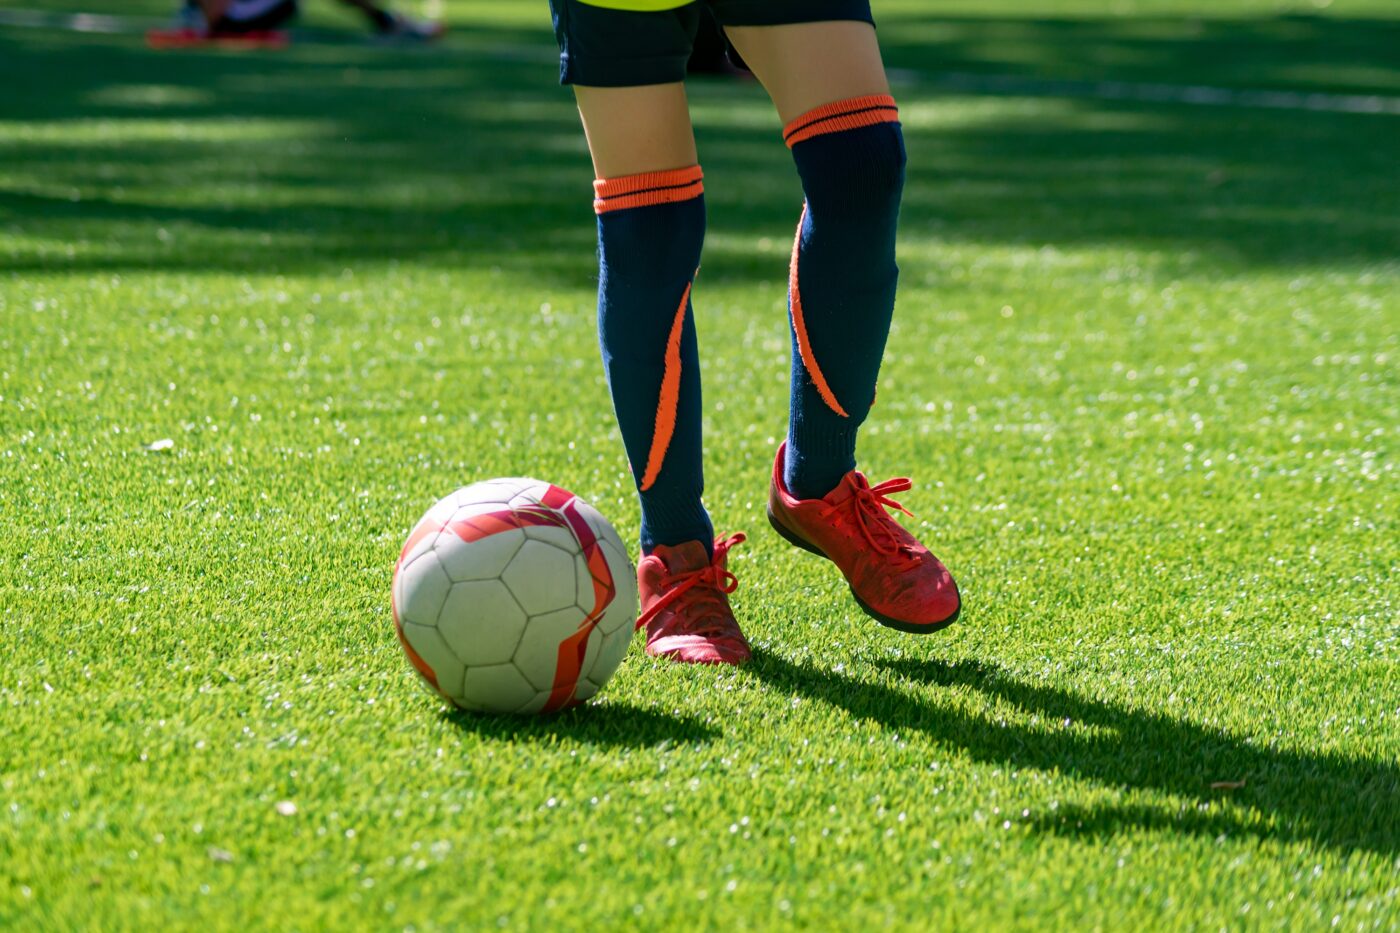 Football player with a ball on the pitch. Bottom view.